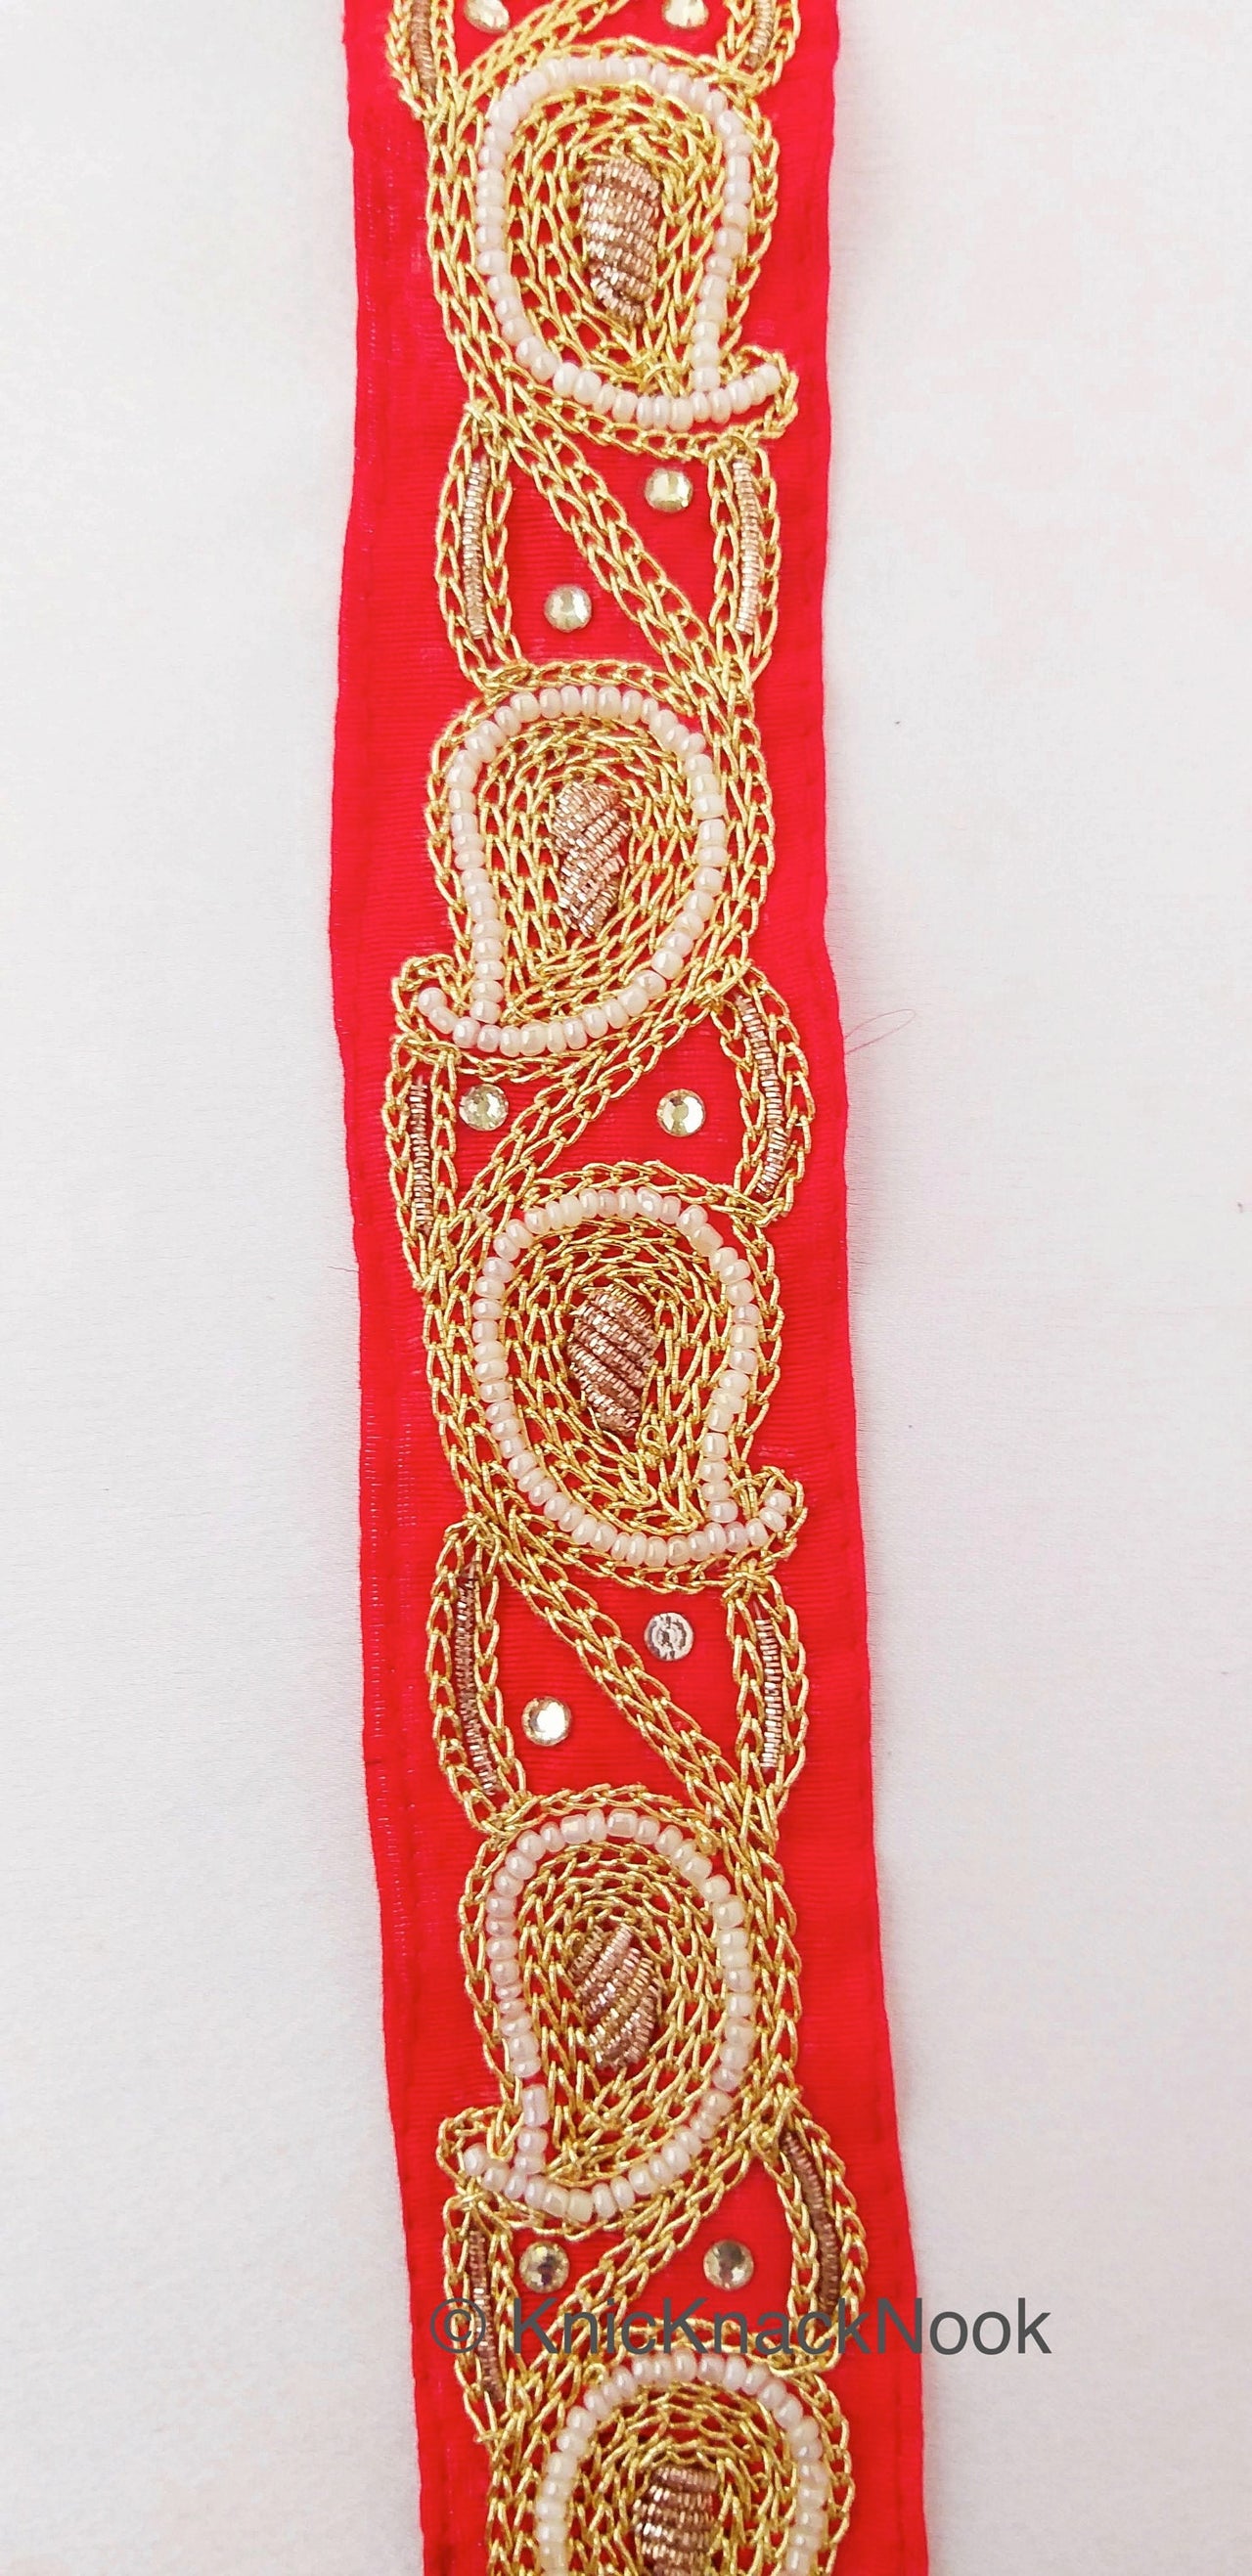 Red Lace Trim With Floral Zardozi Hand Embroidery And White Beads & Indian Stones Kundan Embellishment, Approx. 40mm, Decorative Trim